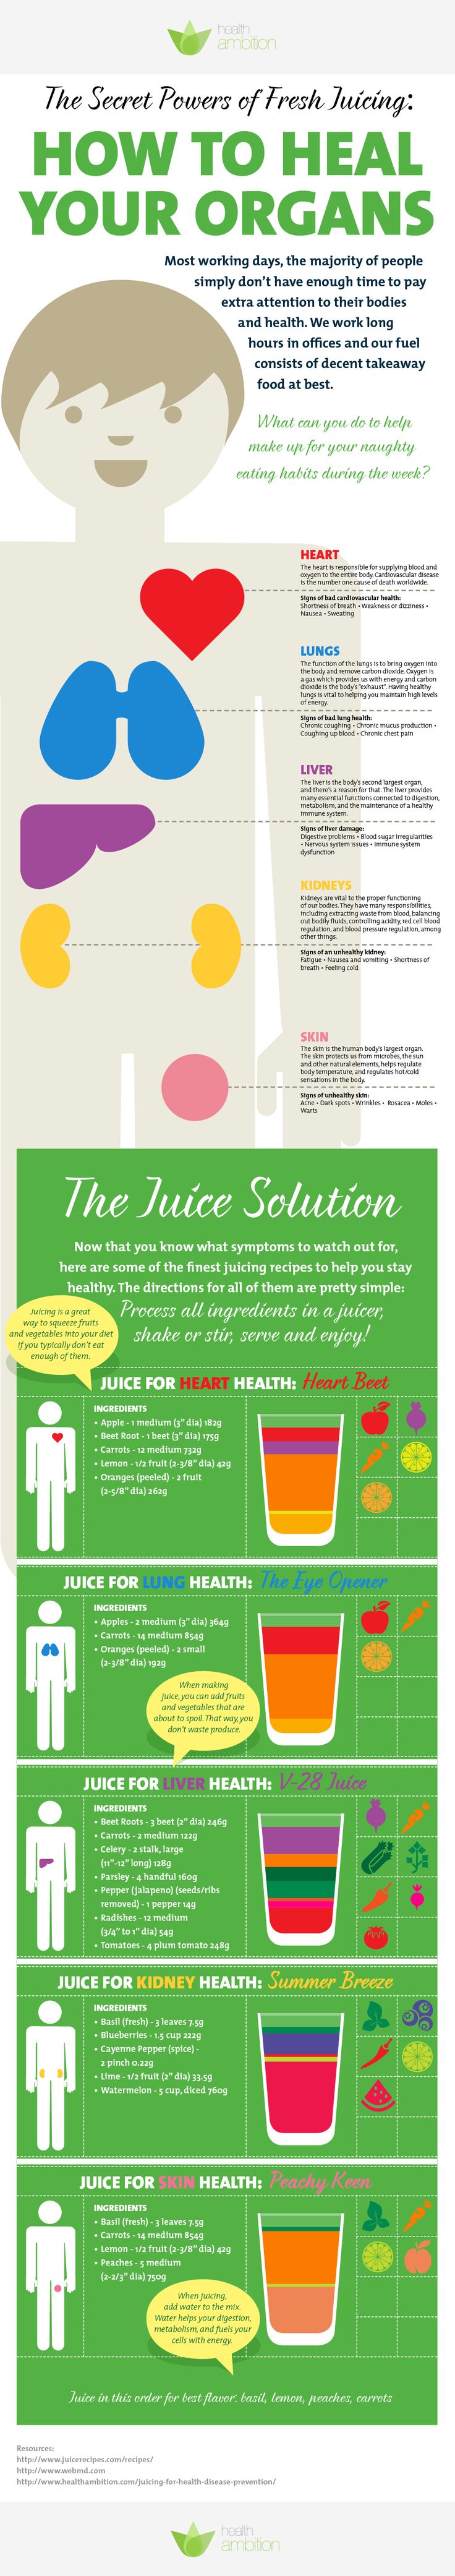 The Secret Powers of Fresh Juicing (Infographic)